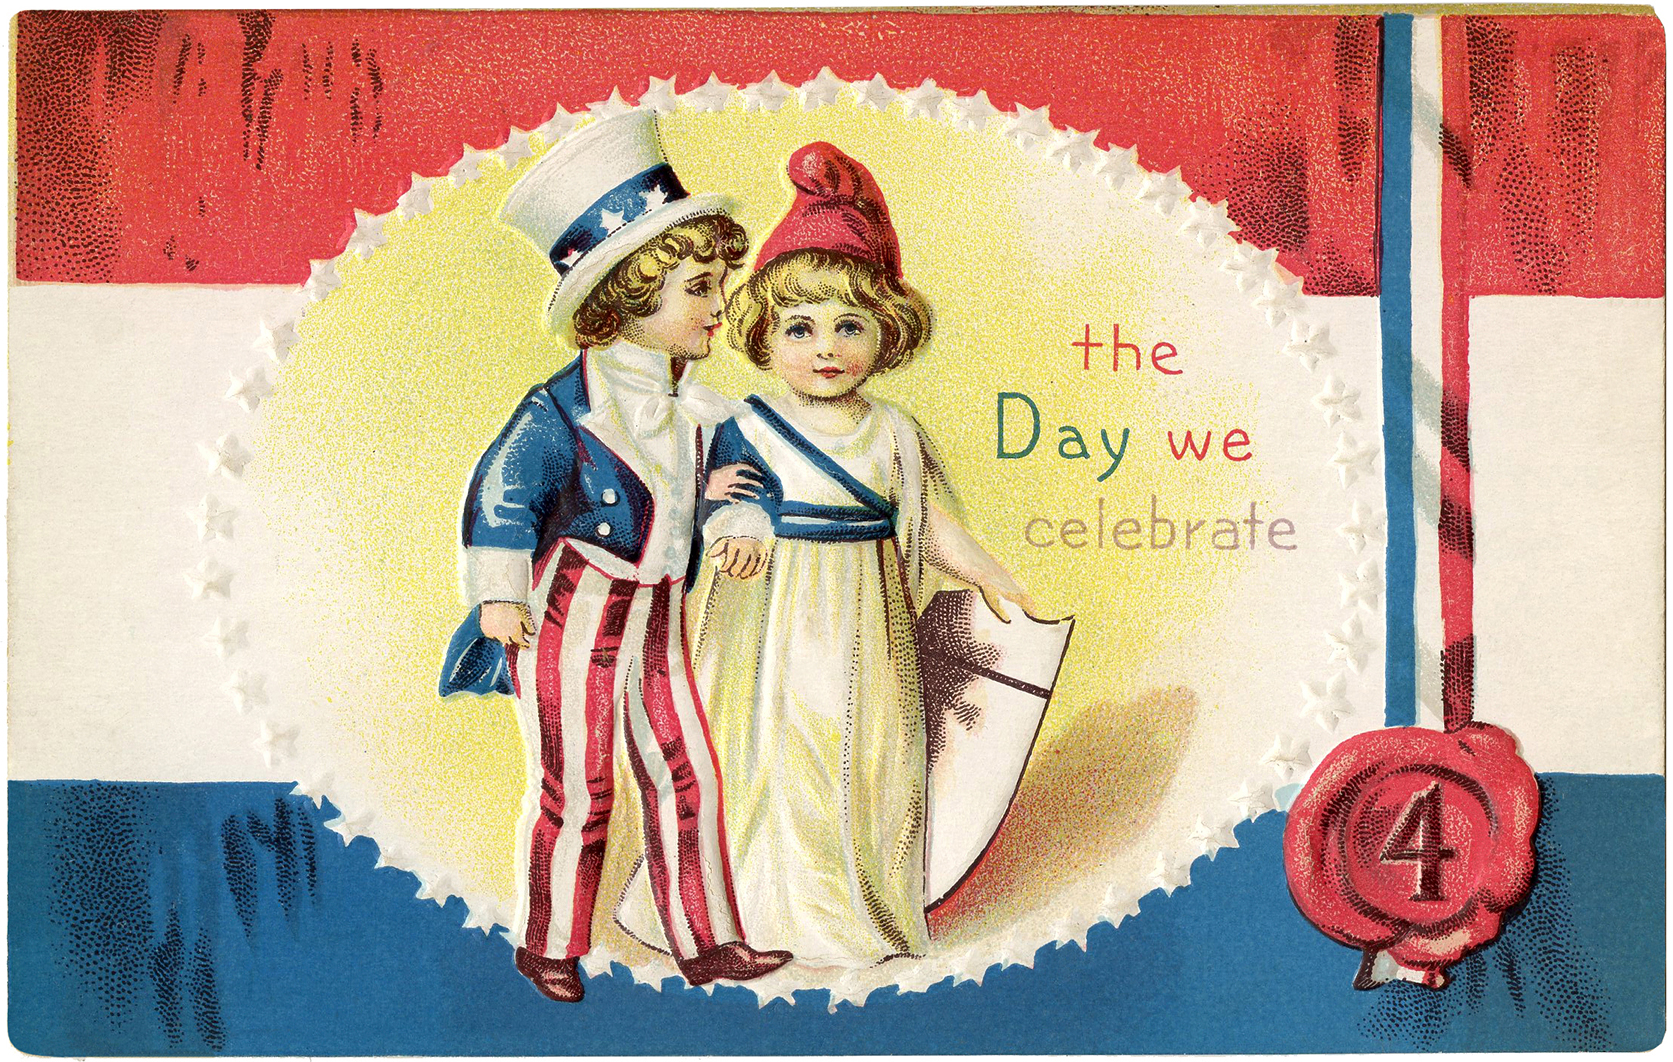 July 4th Kids Image - The Graphics Fairy